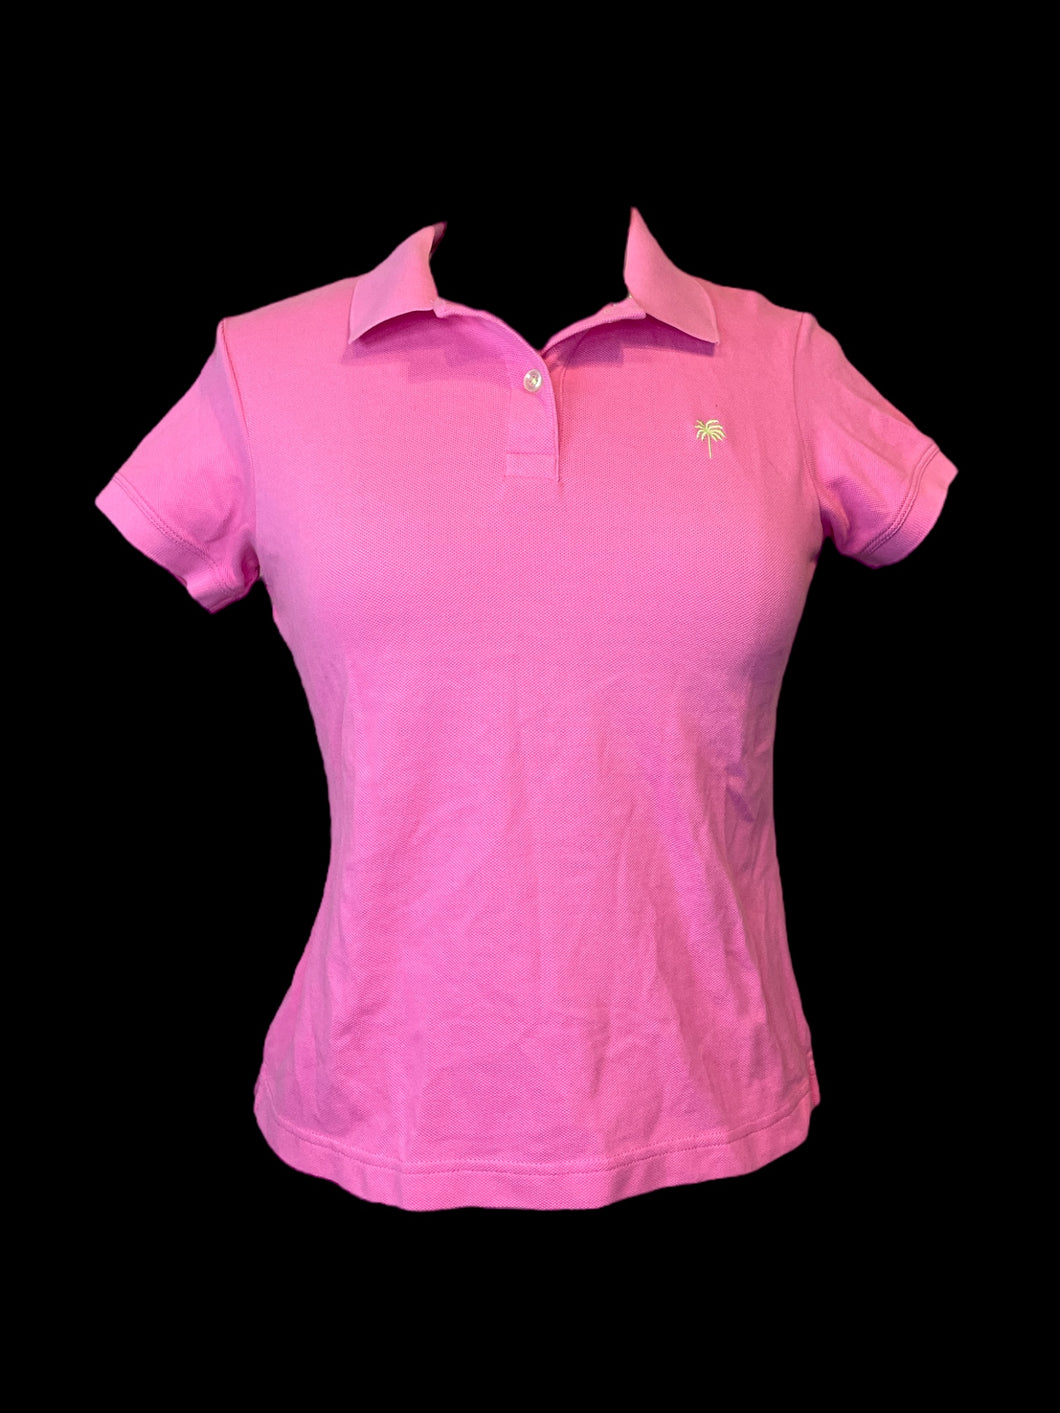 M Pink short sleeve polo top w/ lime green palm tree embroidery